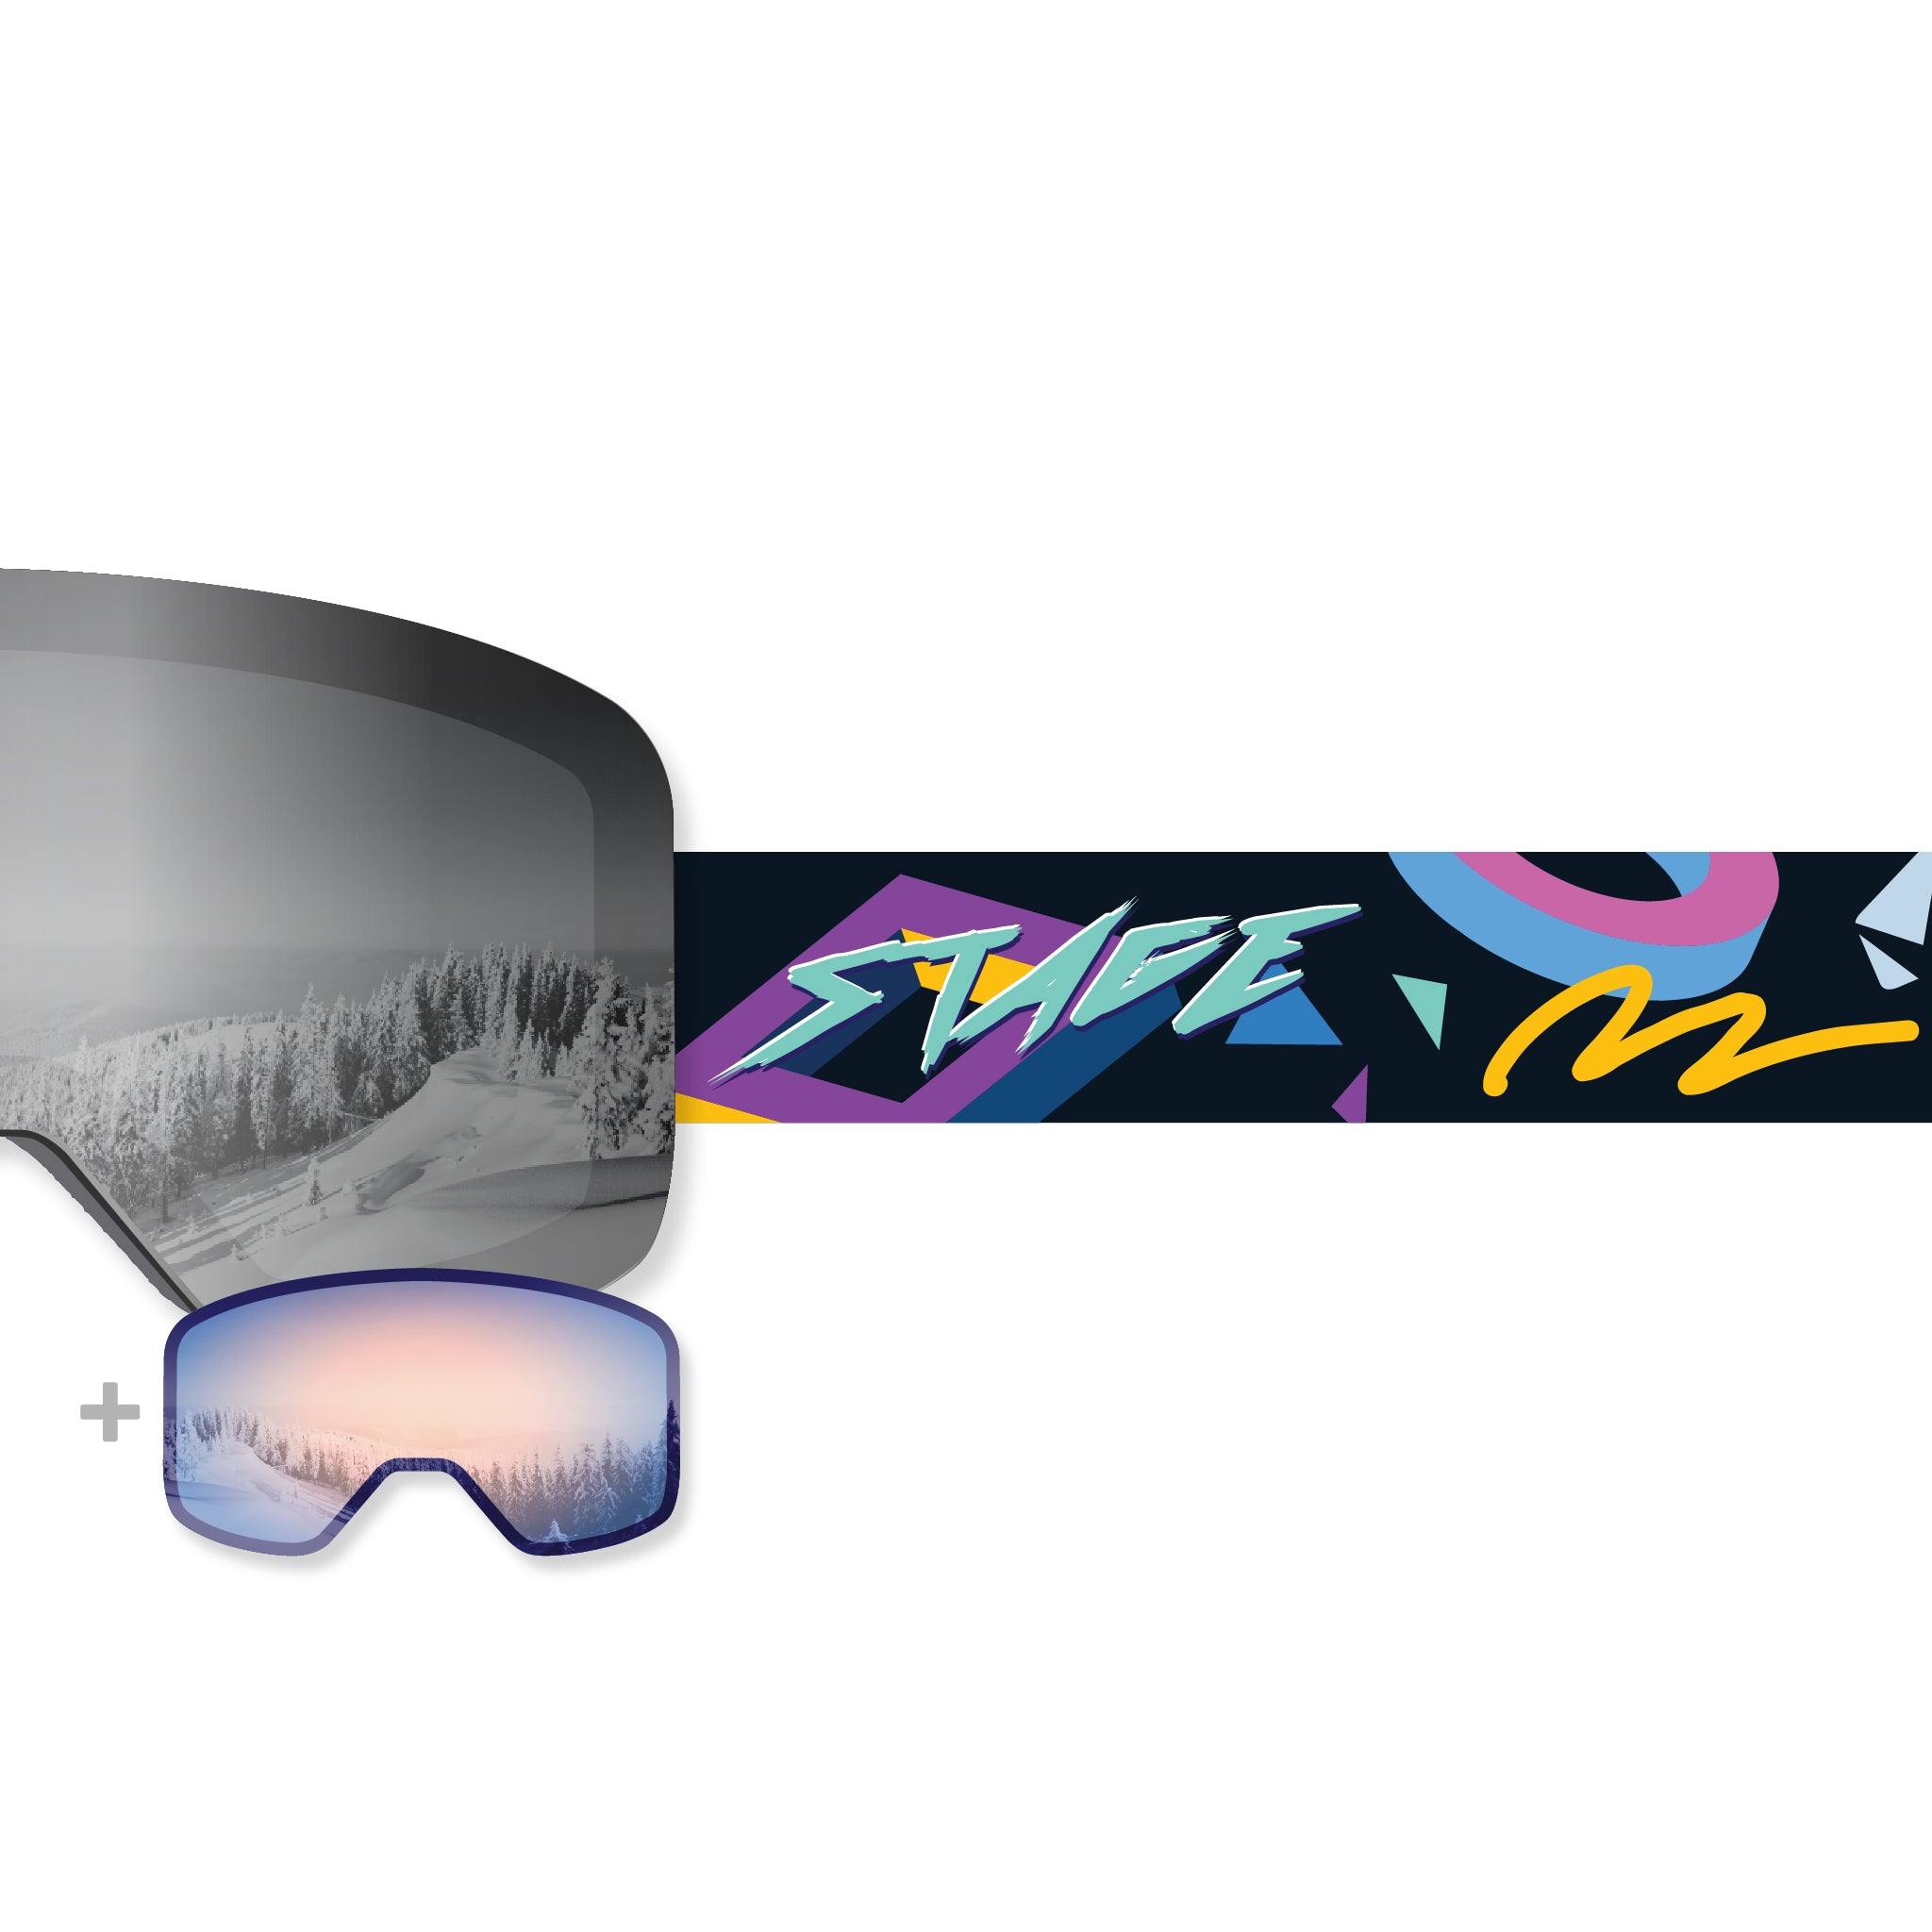 STAGE Propnetic - Magnetic Ski Goggle - Adult Universal, Incl. 2 Lenses